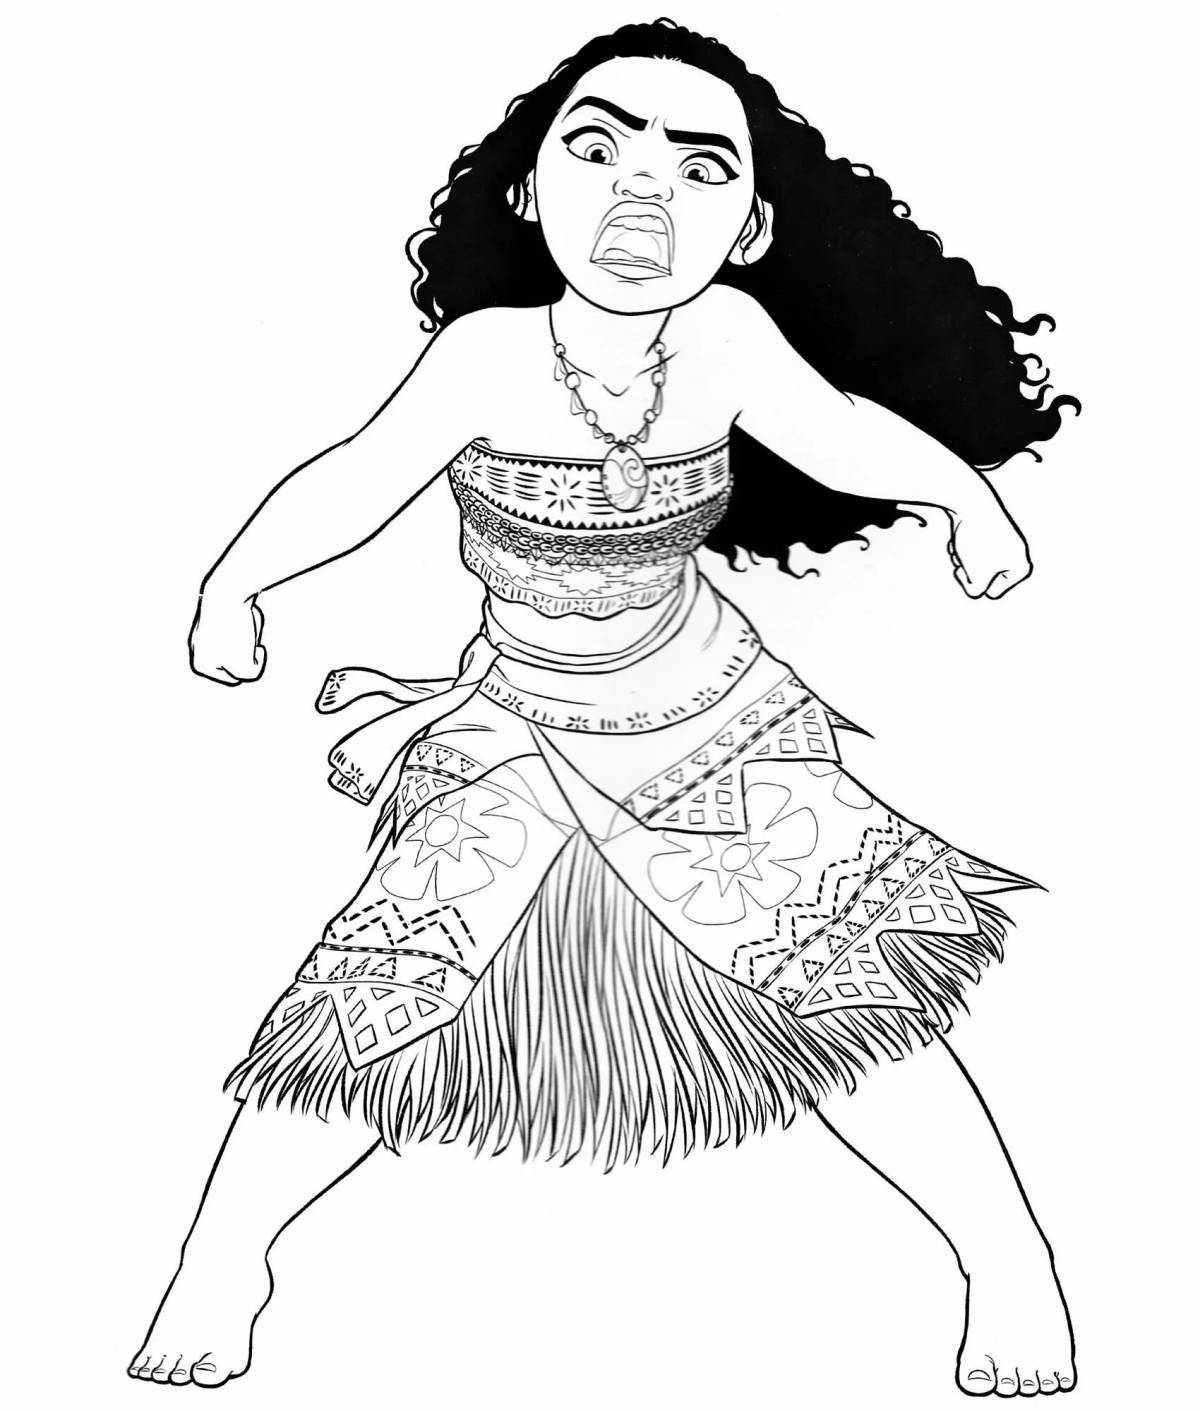 Amazing maui coloring page